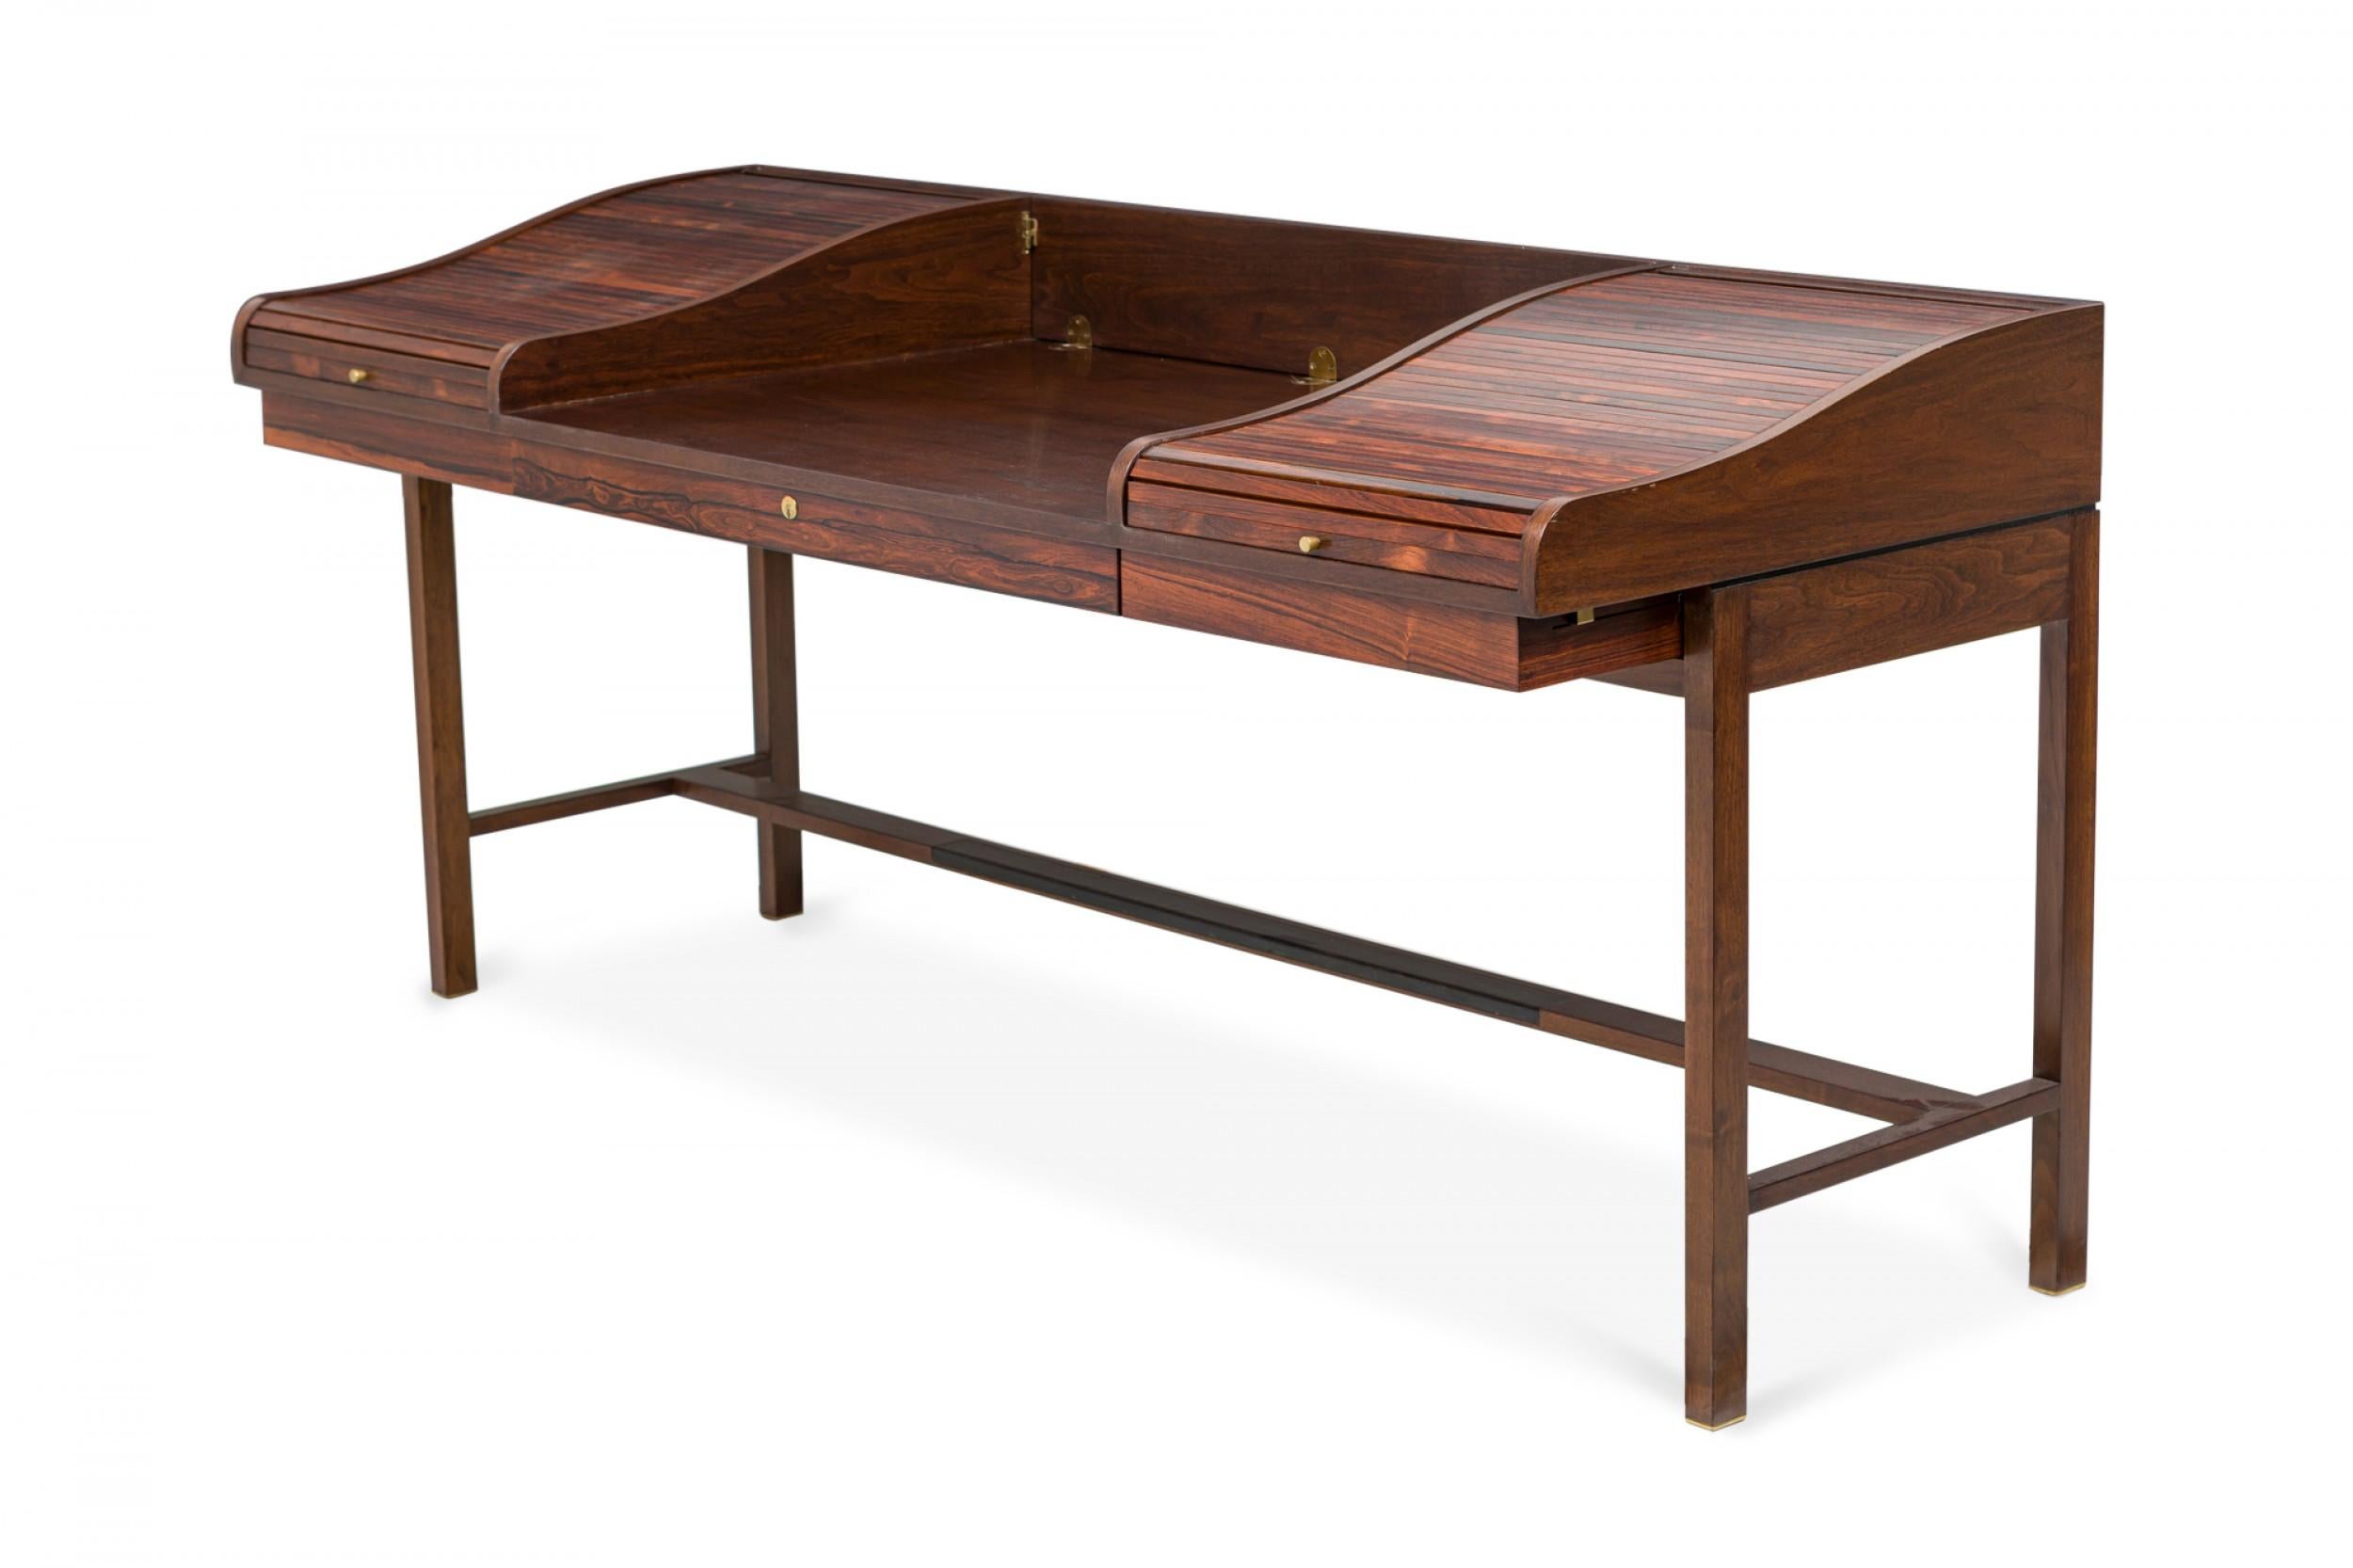 American Mid-Century rosewood and mahogany desk with two tambour roll top outer sections with brass hardware that open to reveal workspace and compartments, with an open central workspace and a back rail that folds to create a partners desk, resting